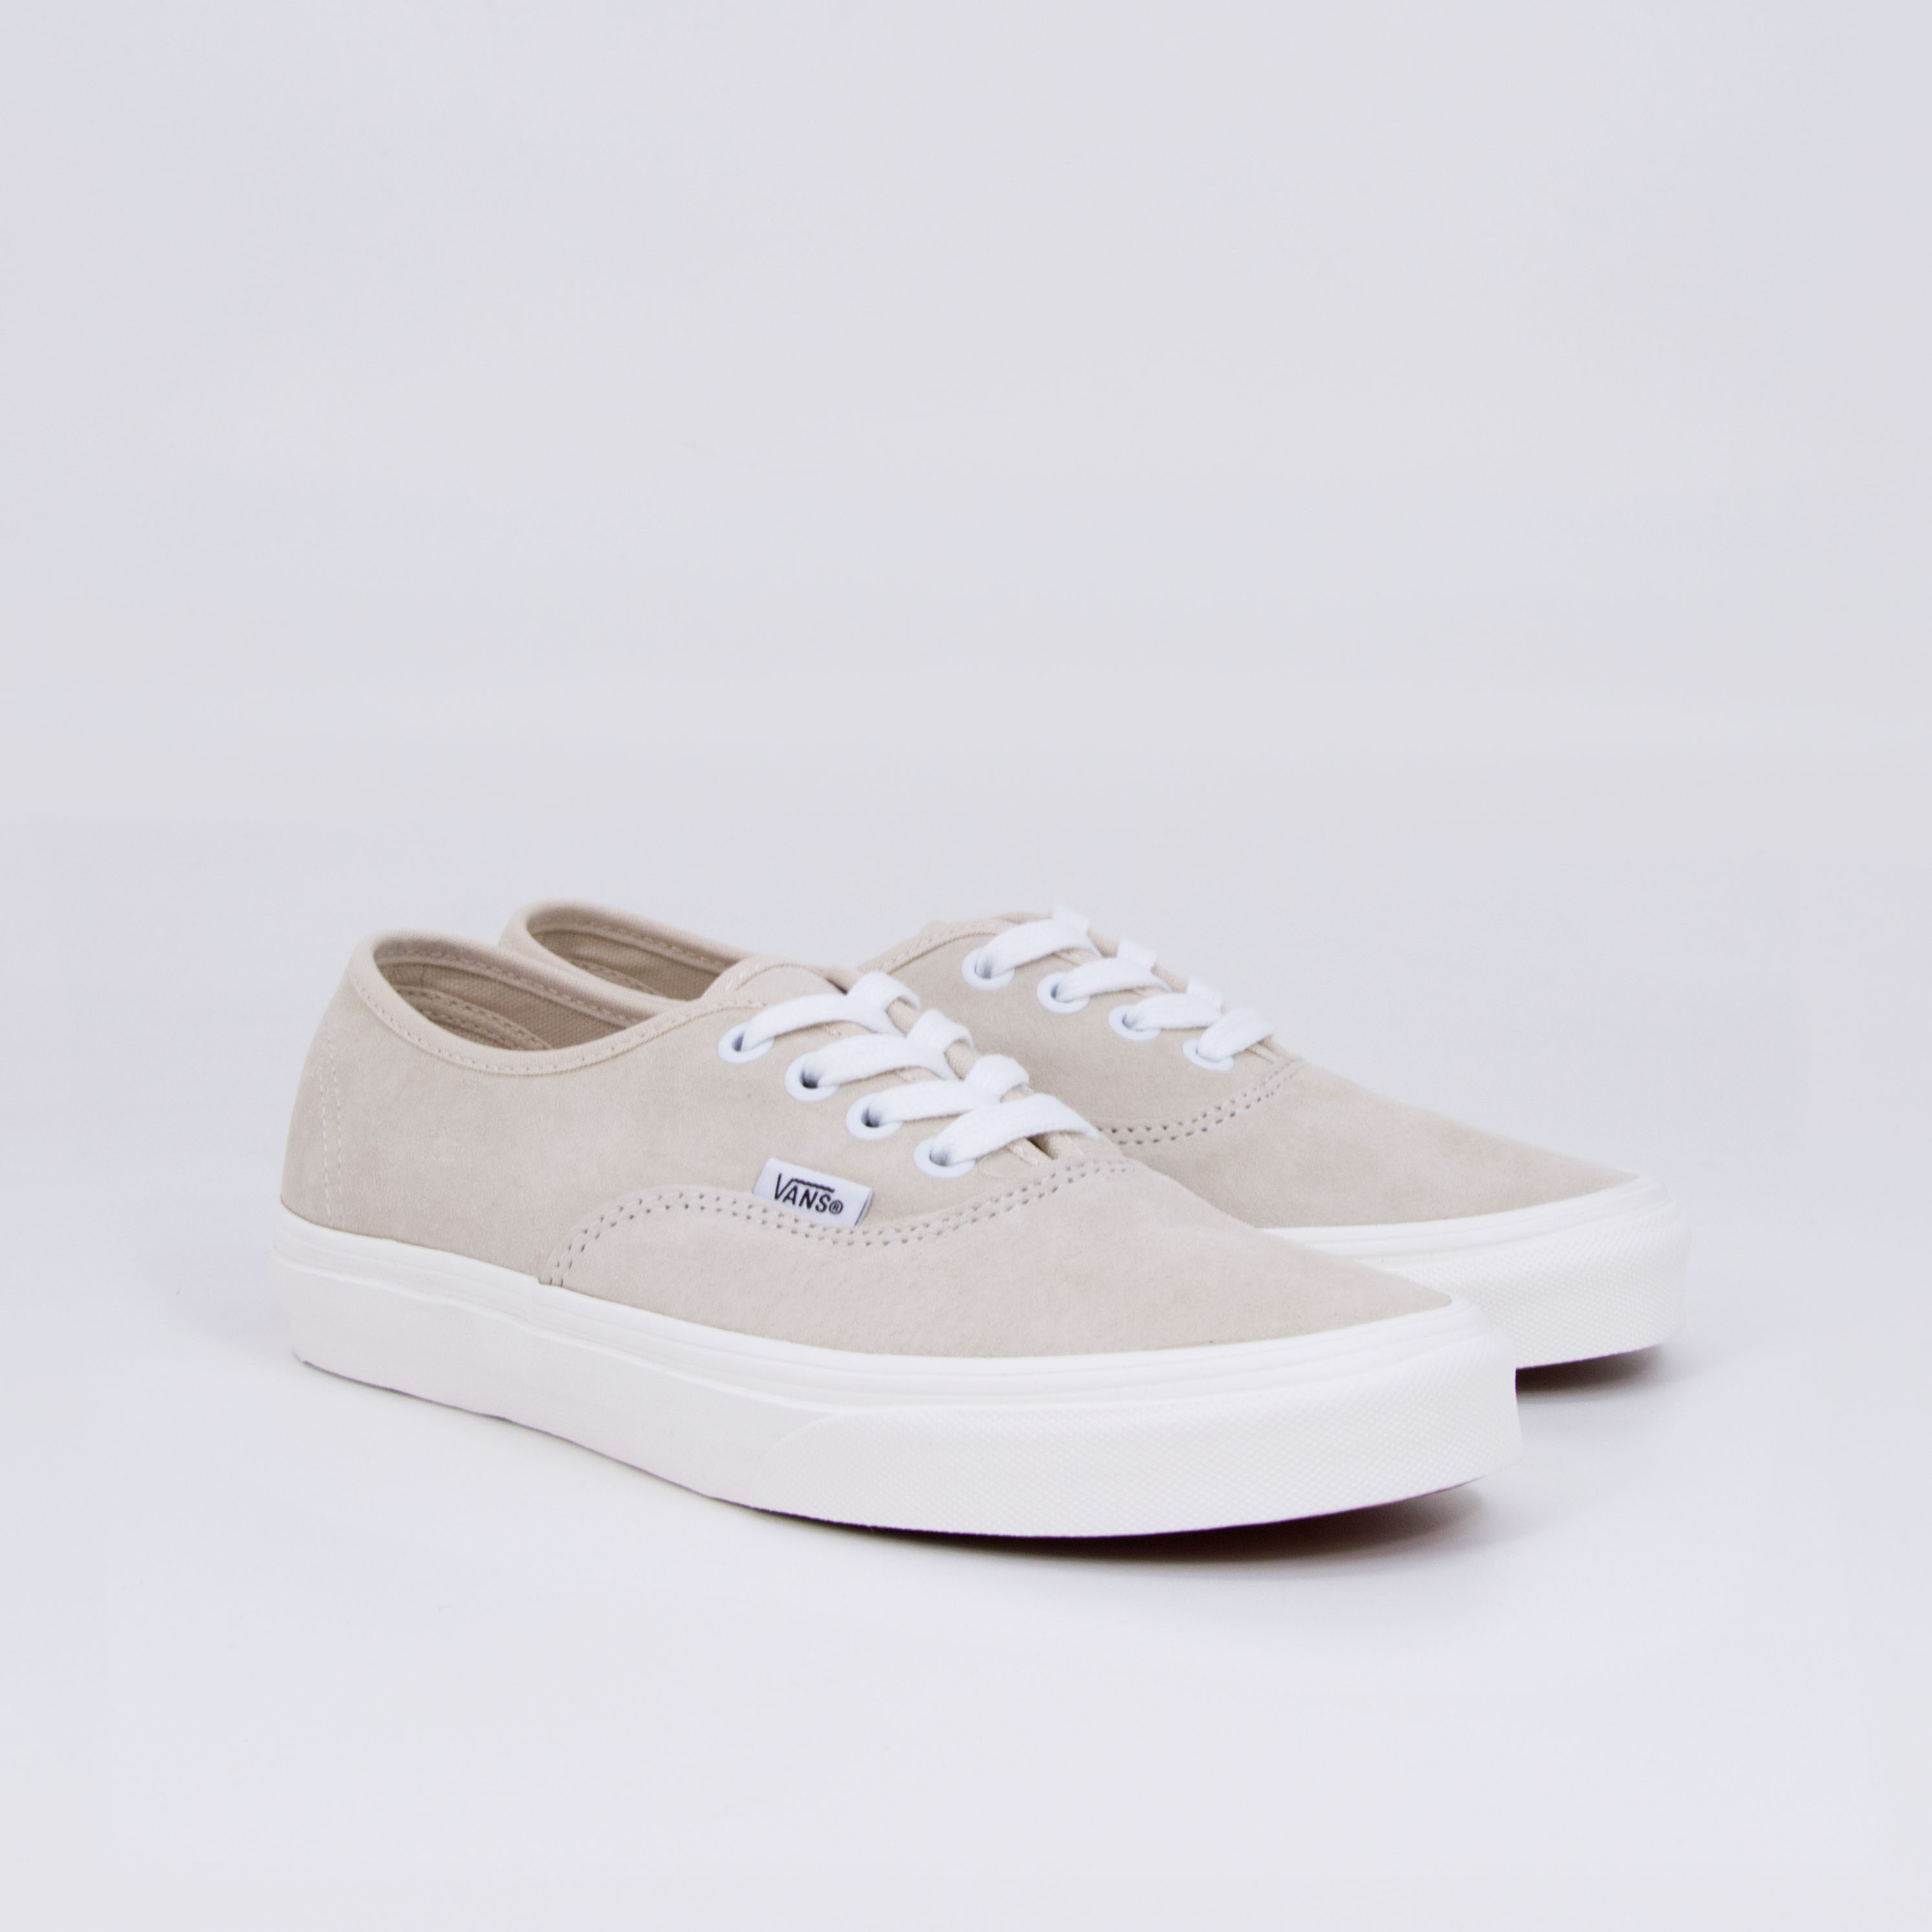 Vans - AUTHENTIC PIG SUEDE - Sandshell/Snow White